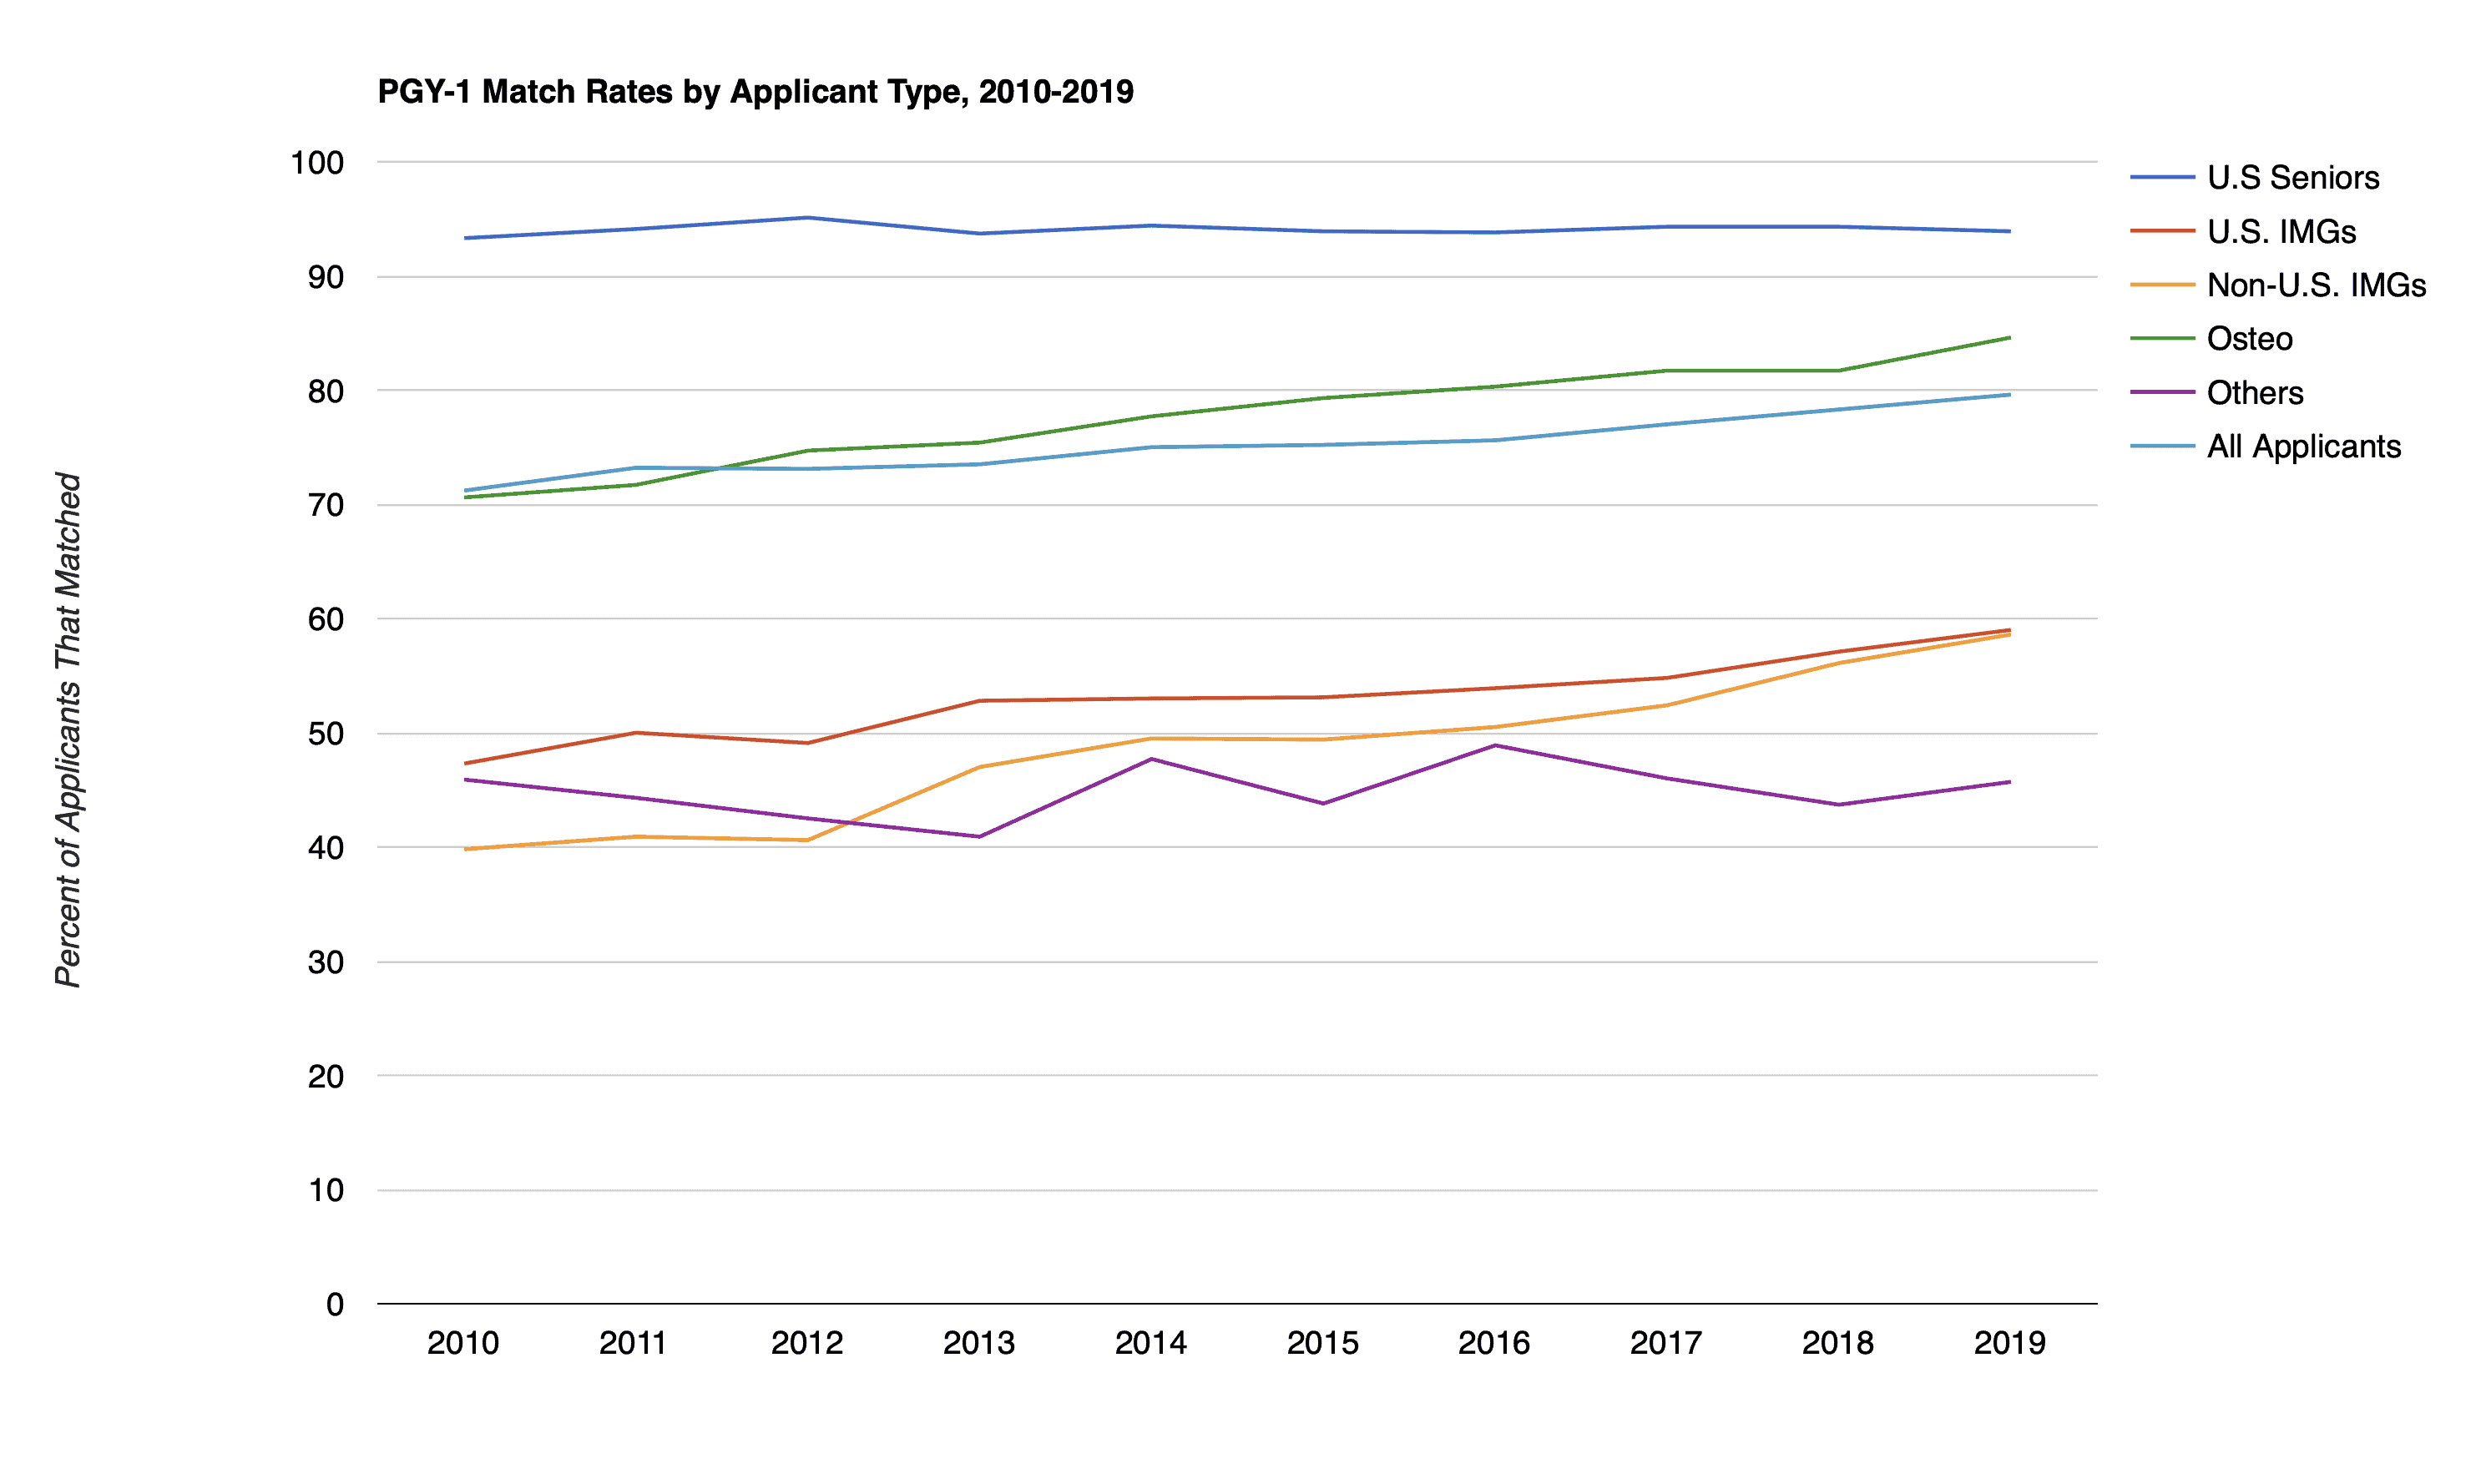 PGY-1 Match Rates by Applicant